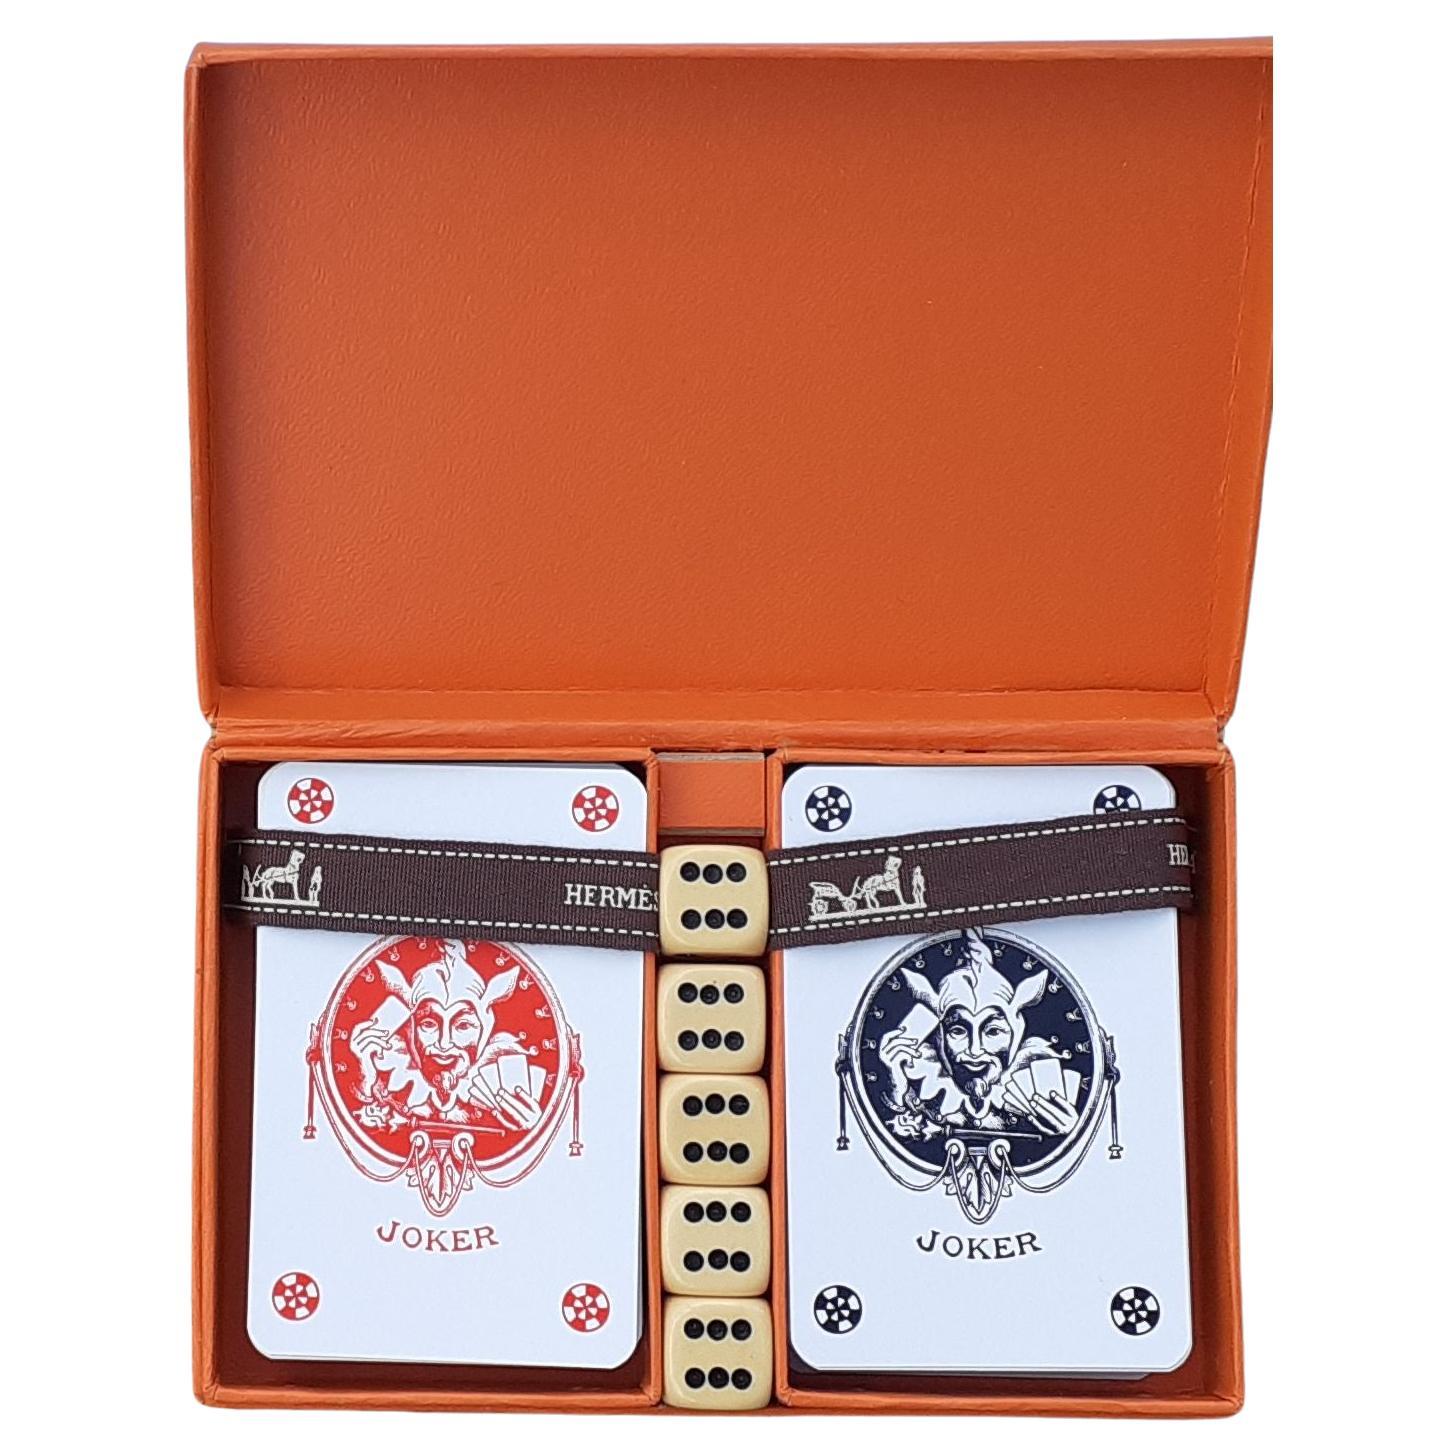 Rare Authentic Hermès Card Games

Specially manufactured for the liner Lydia, the back of each card is decorated with the design of the liner

The box includes 2 complete sets of 54 cards and 5 dices

The box is signed 